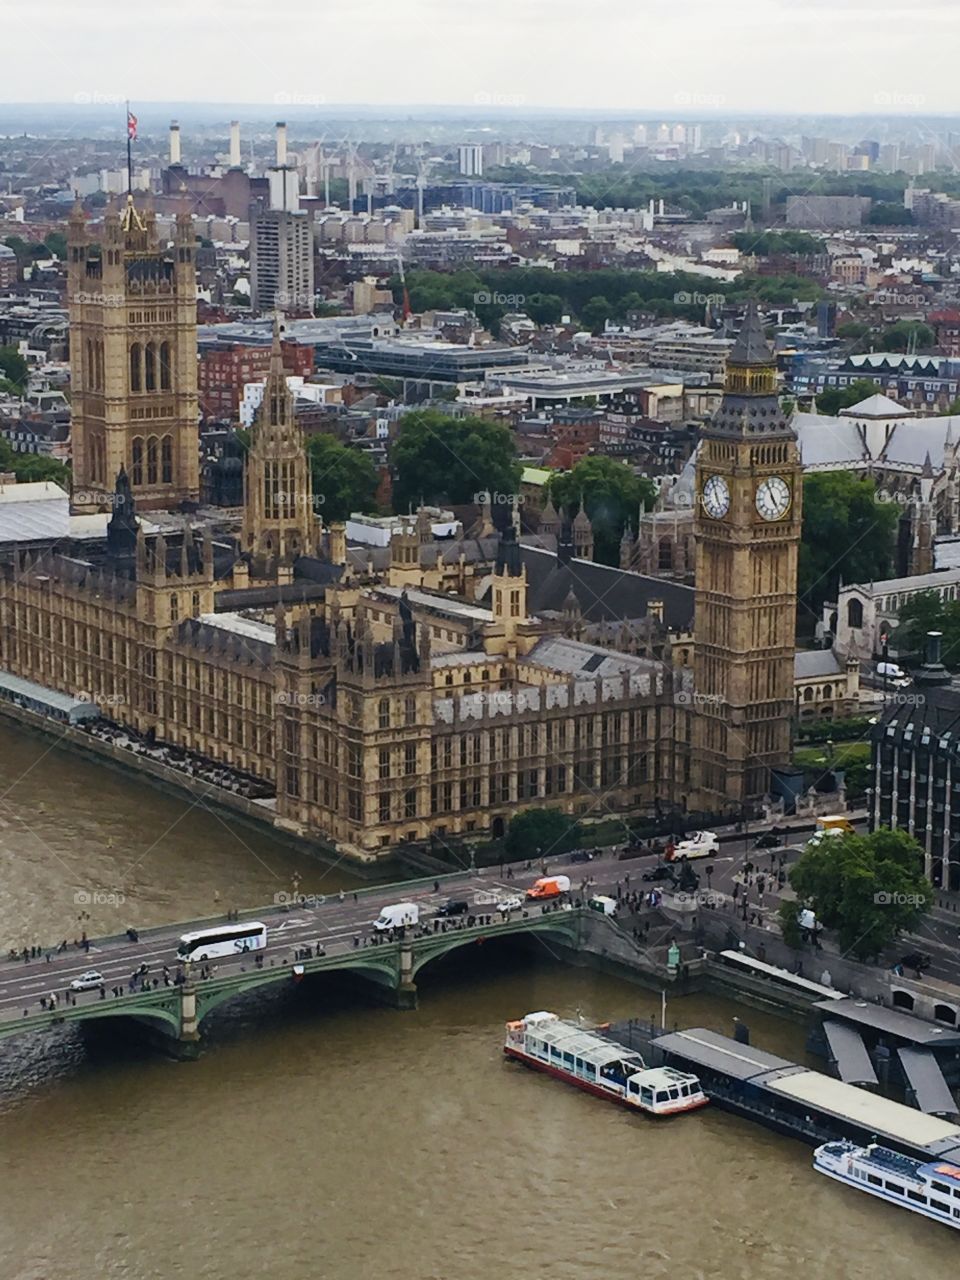 Incredible view of London, featuring Big Ben